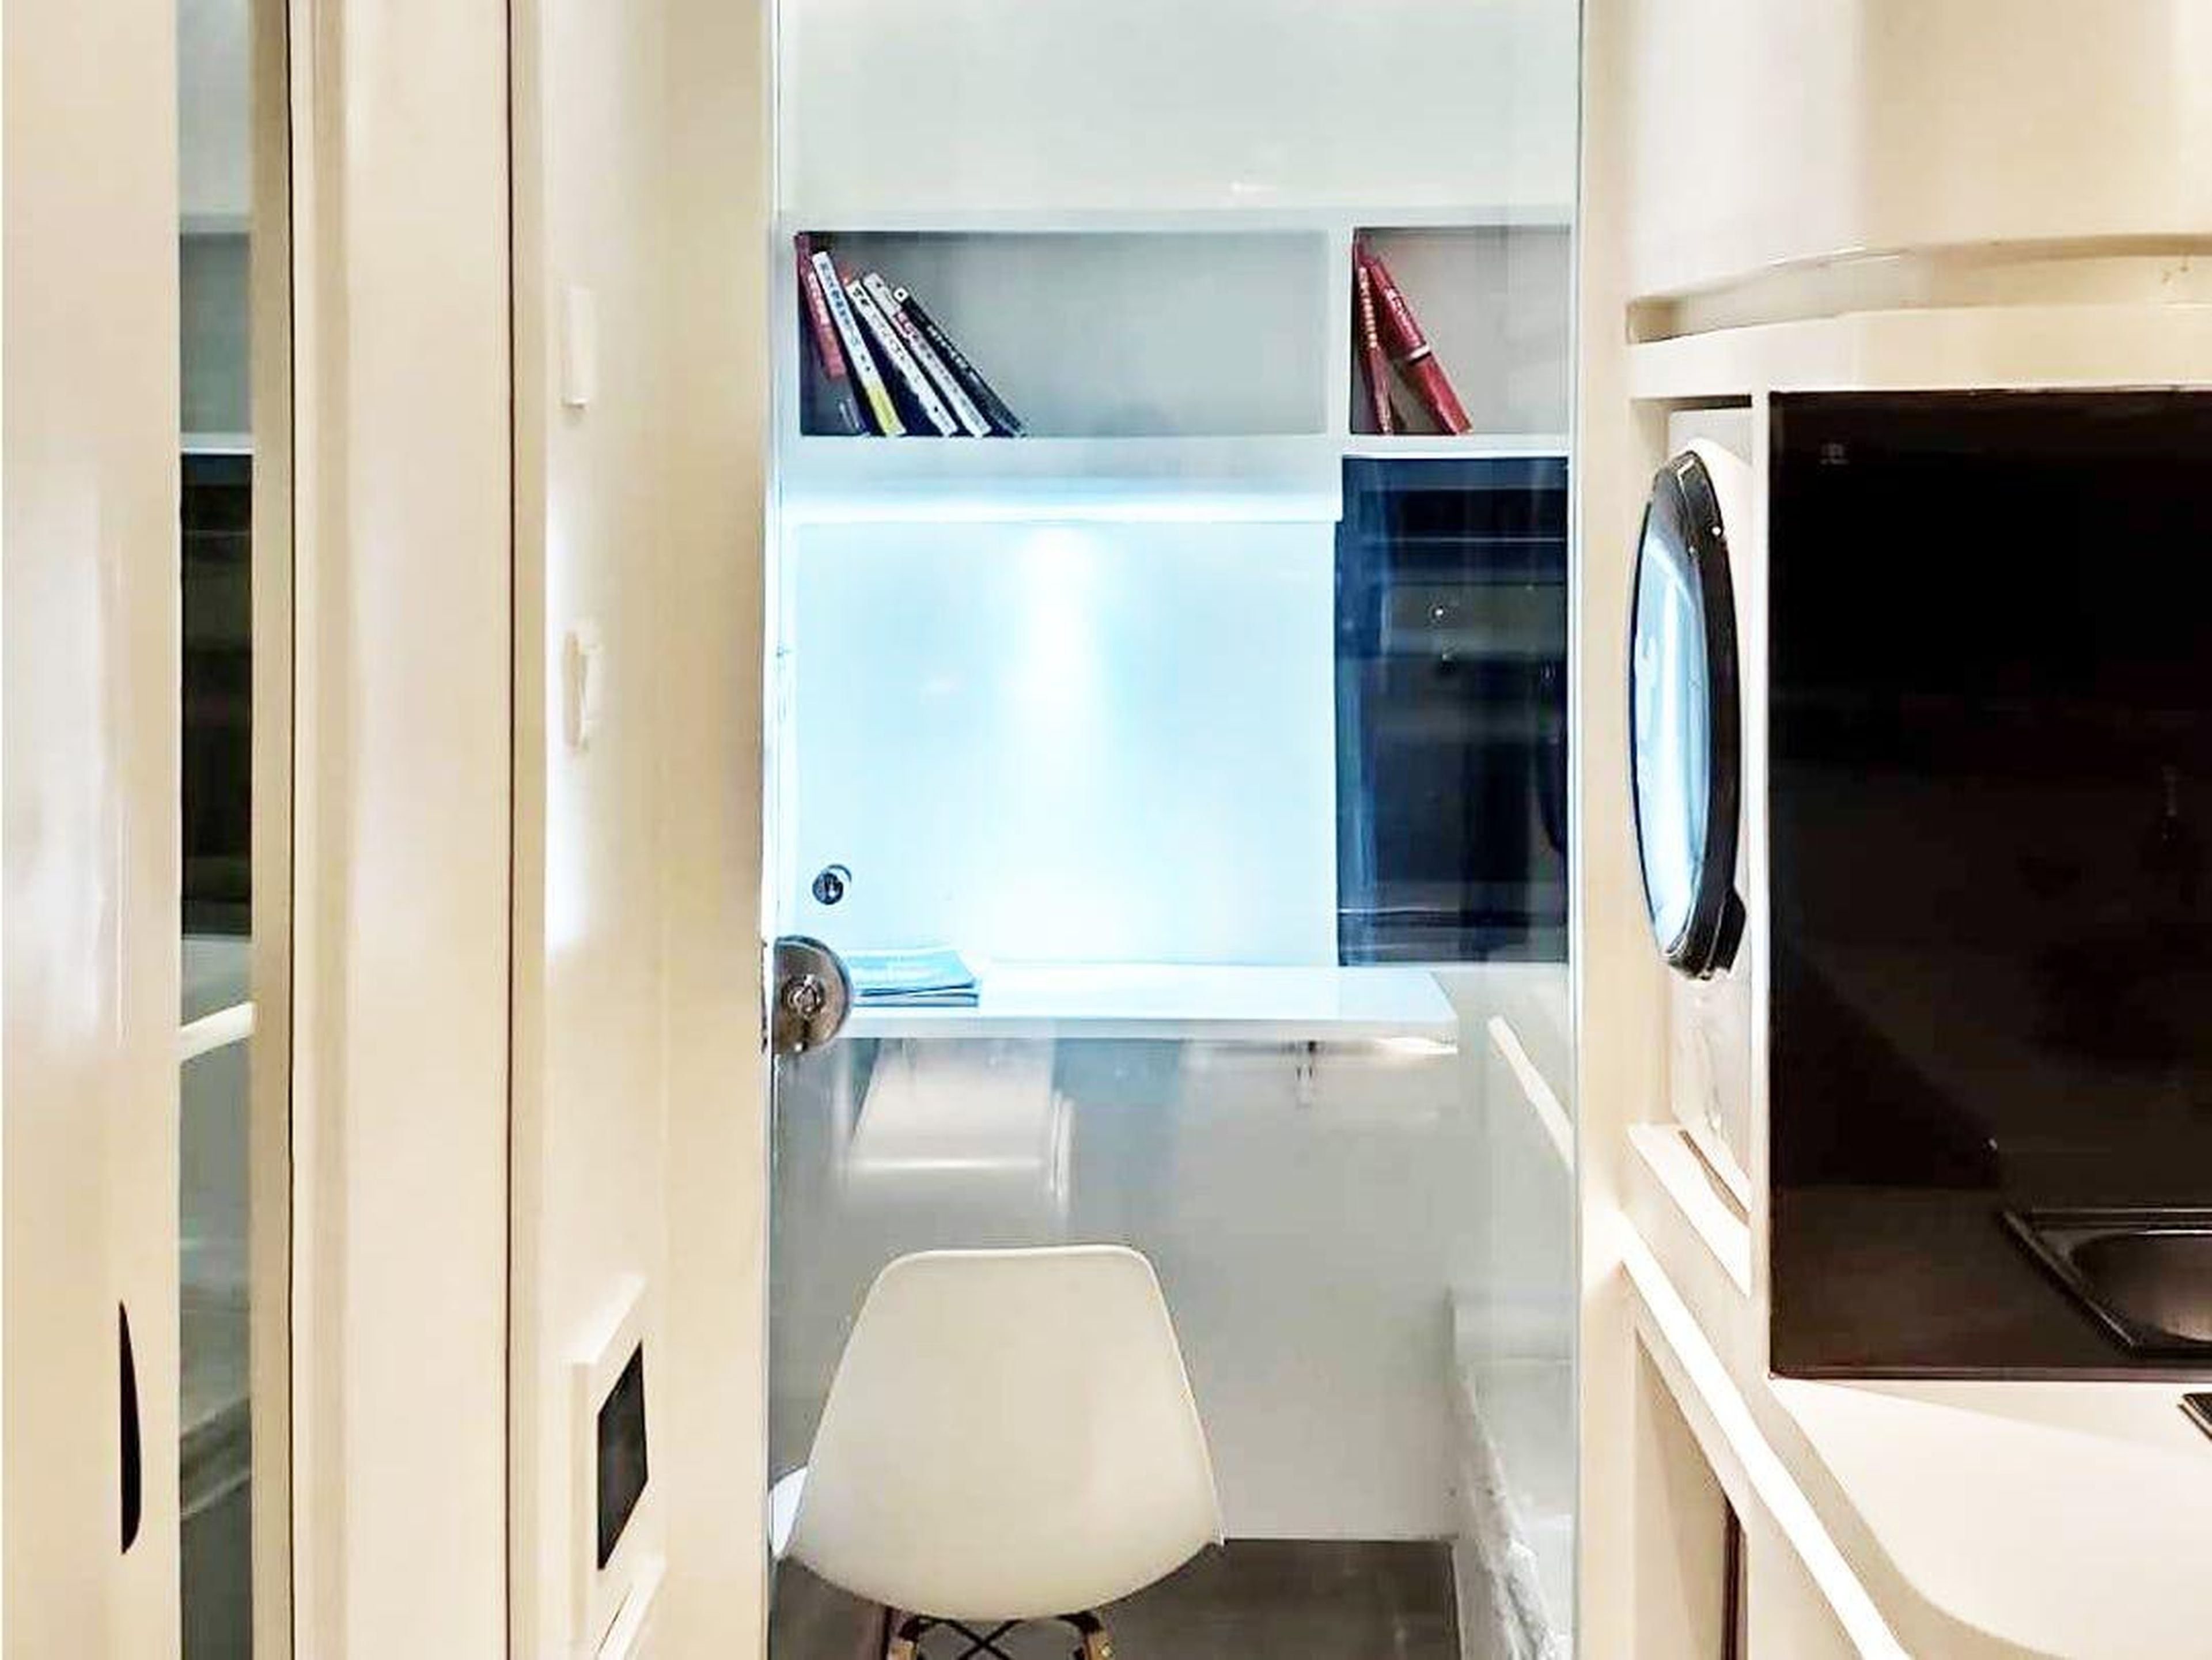 Between the AI integration and the sleek white furniture, the tiny home feels almost like a spaceship.